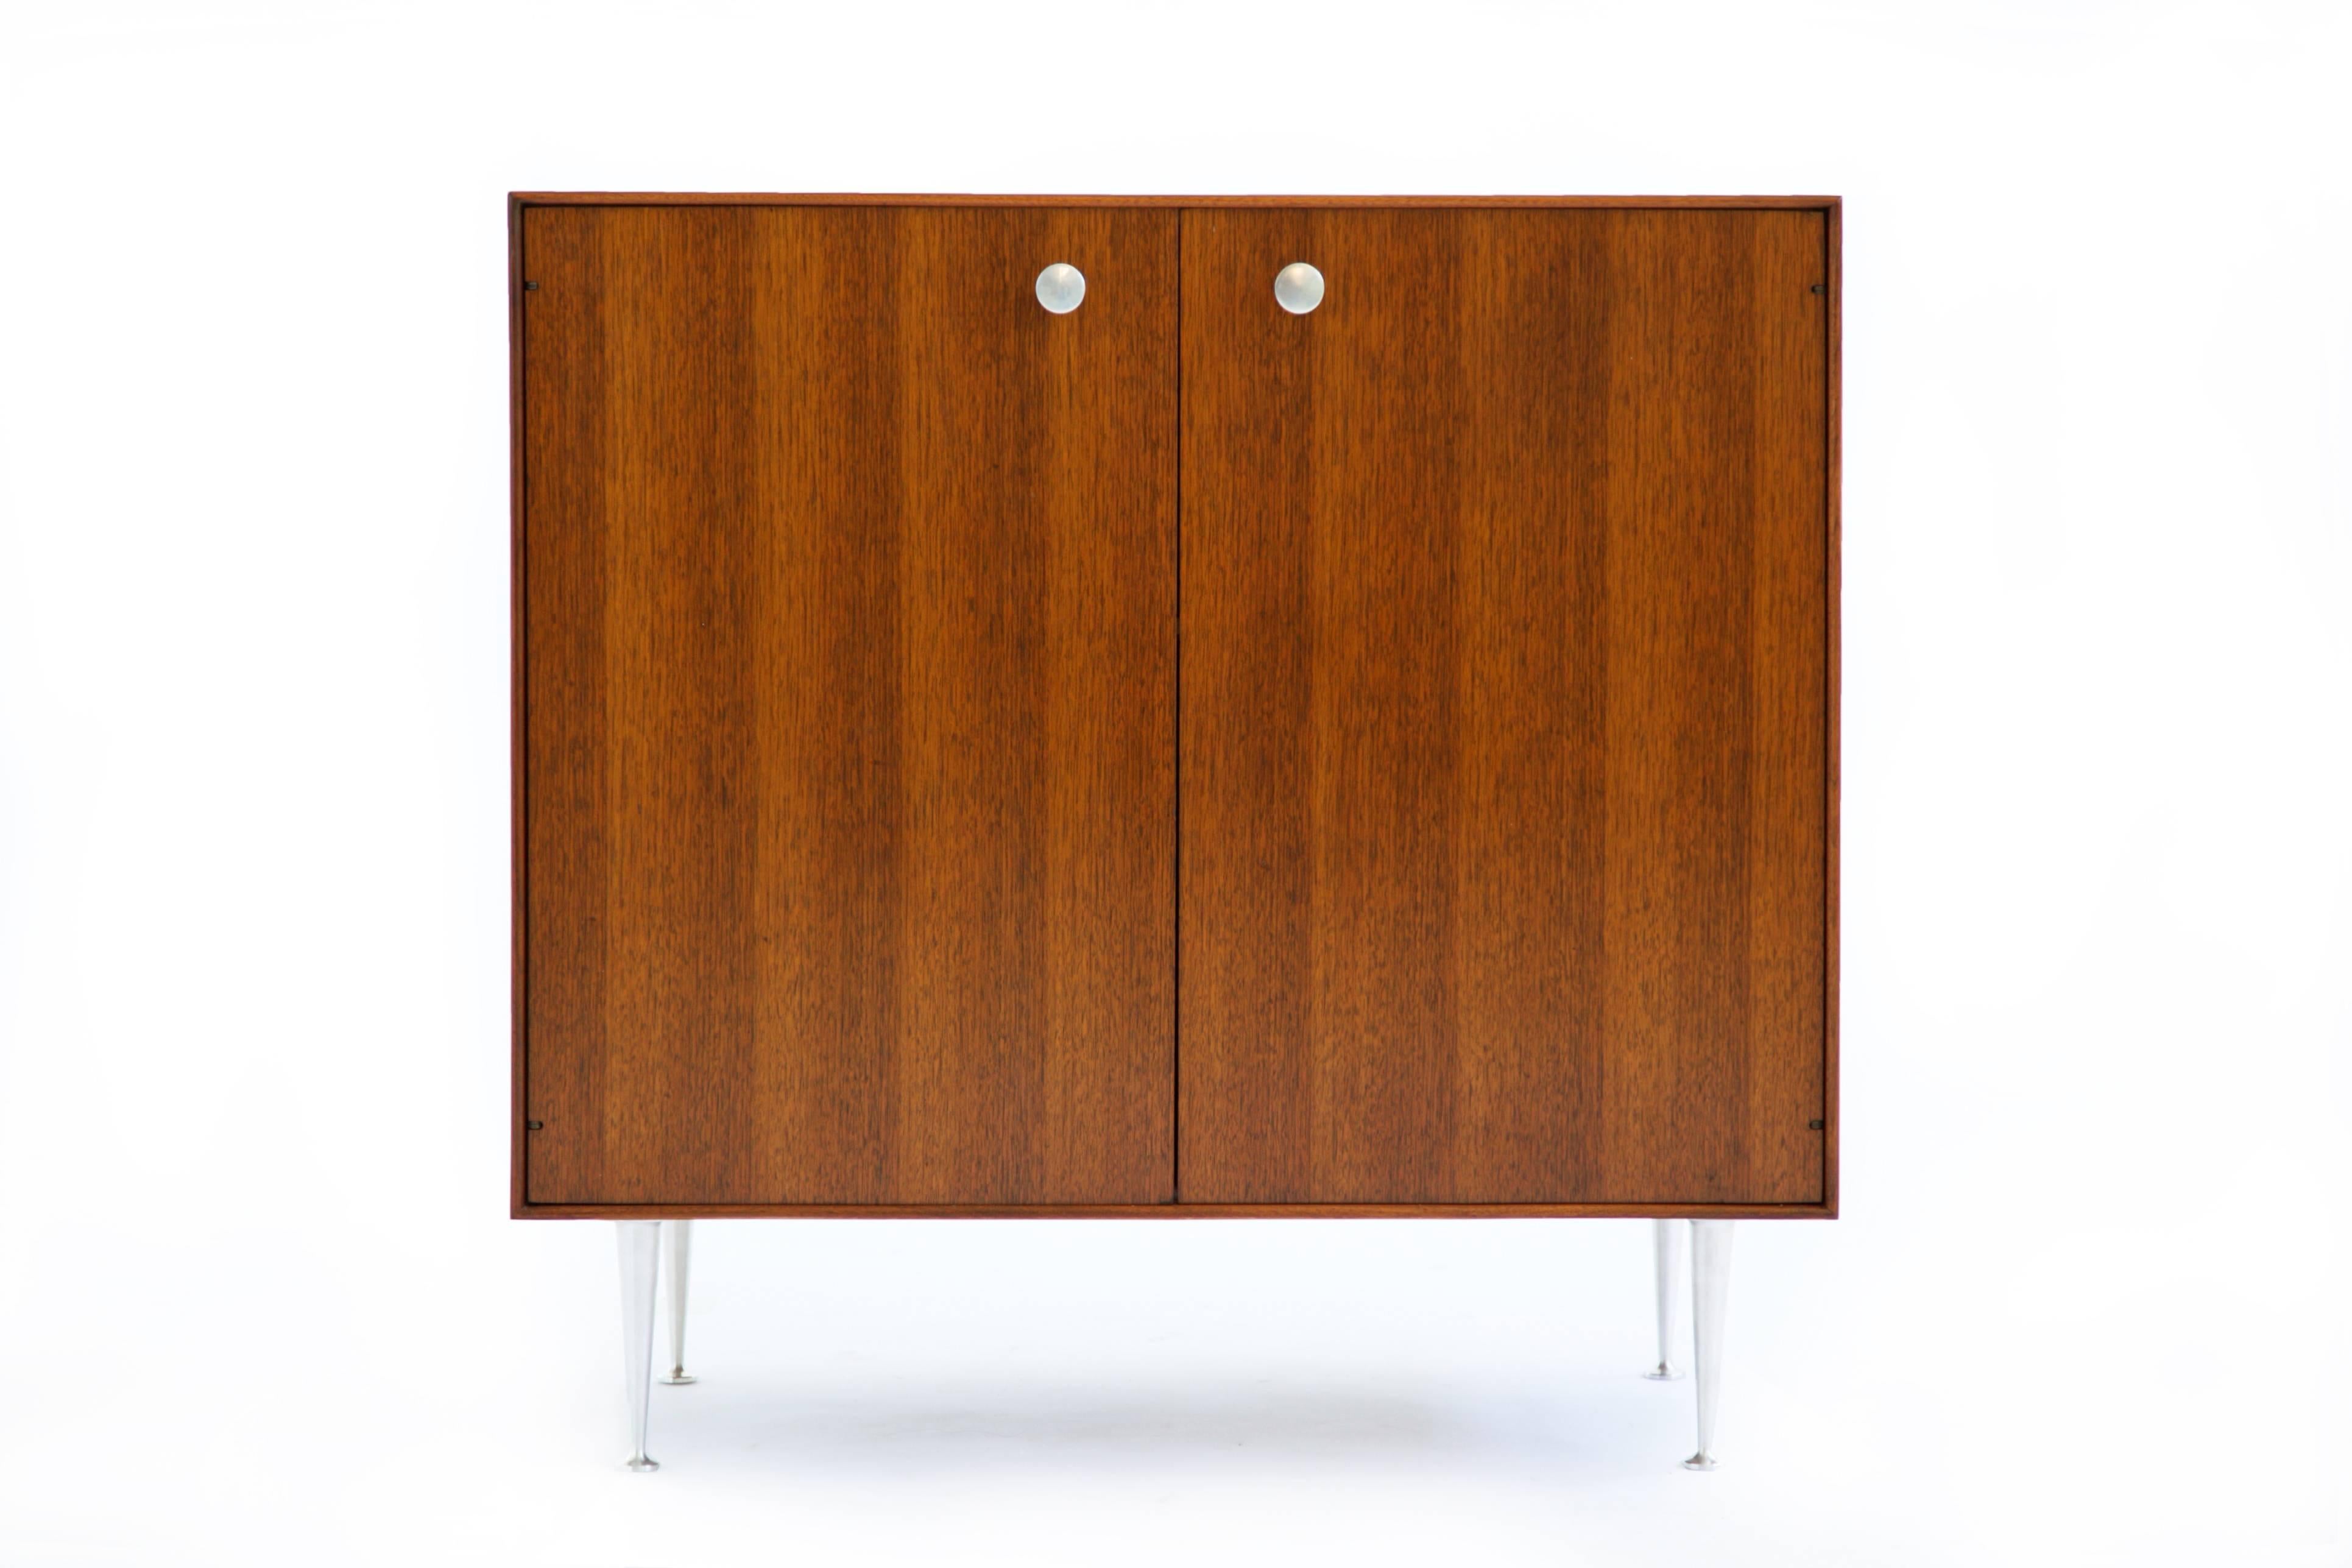 Nelson for Herman Miller Case, Quarter-sawn black walnut with aluminum pulls and tapered legs and adjustable shelf.  

